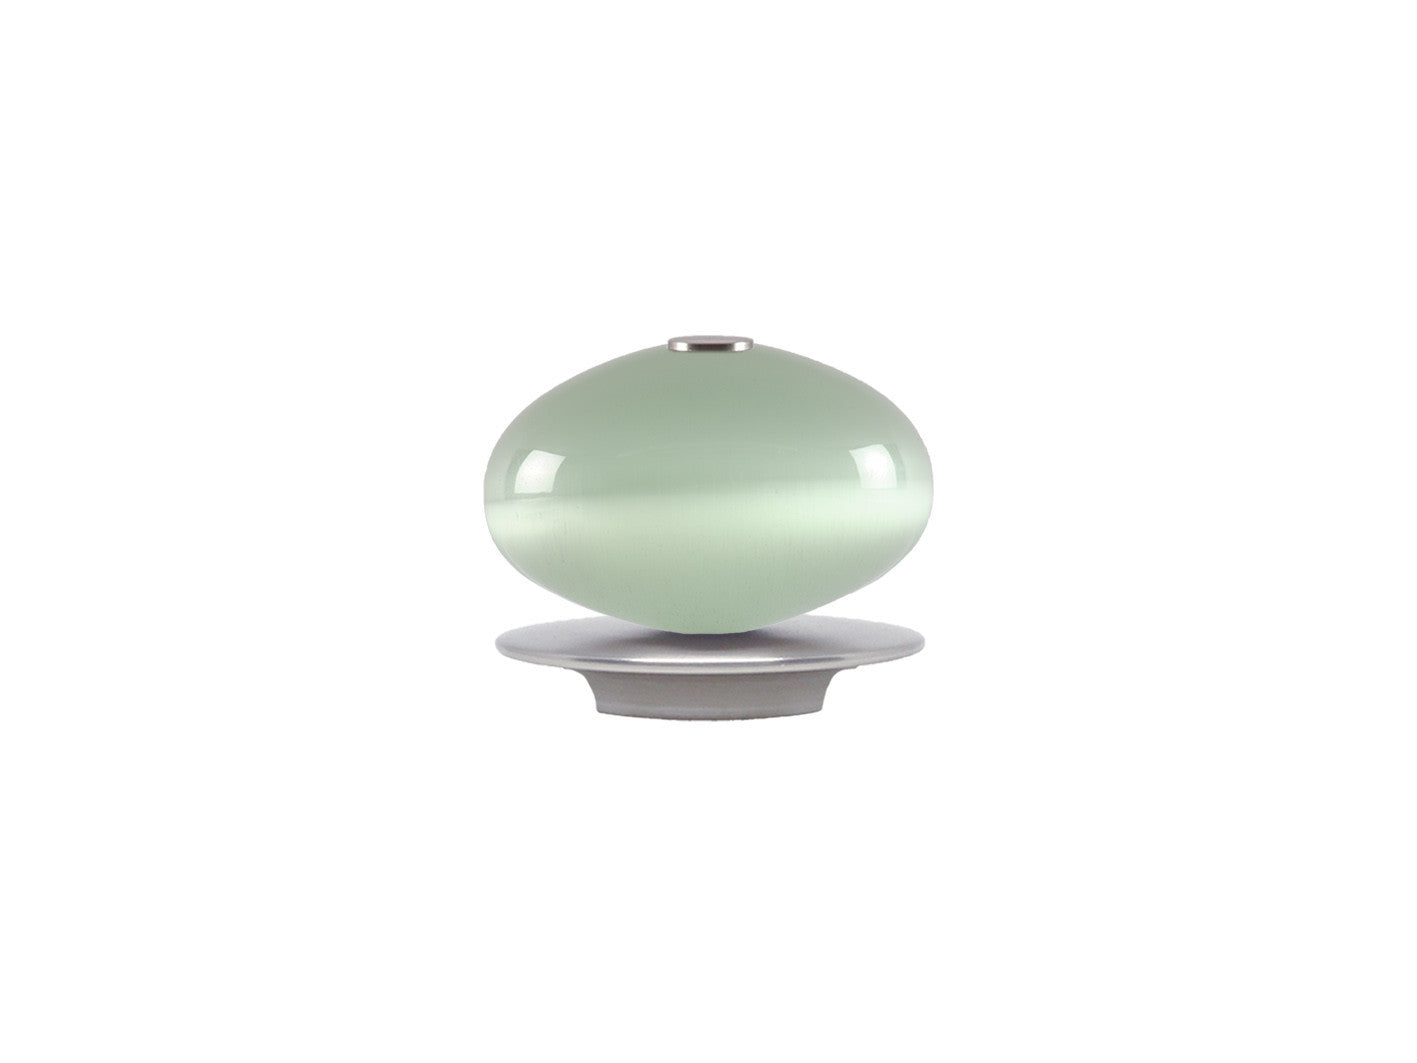 Glass moonstone finial in opal white | Walcot House 30mm collection